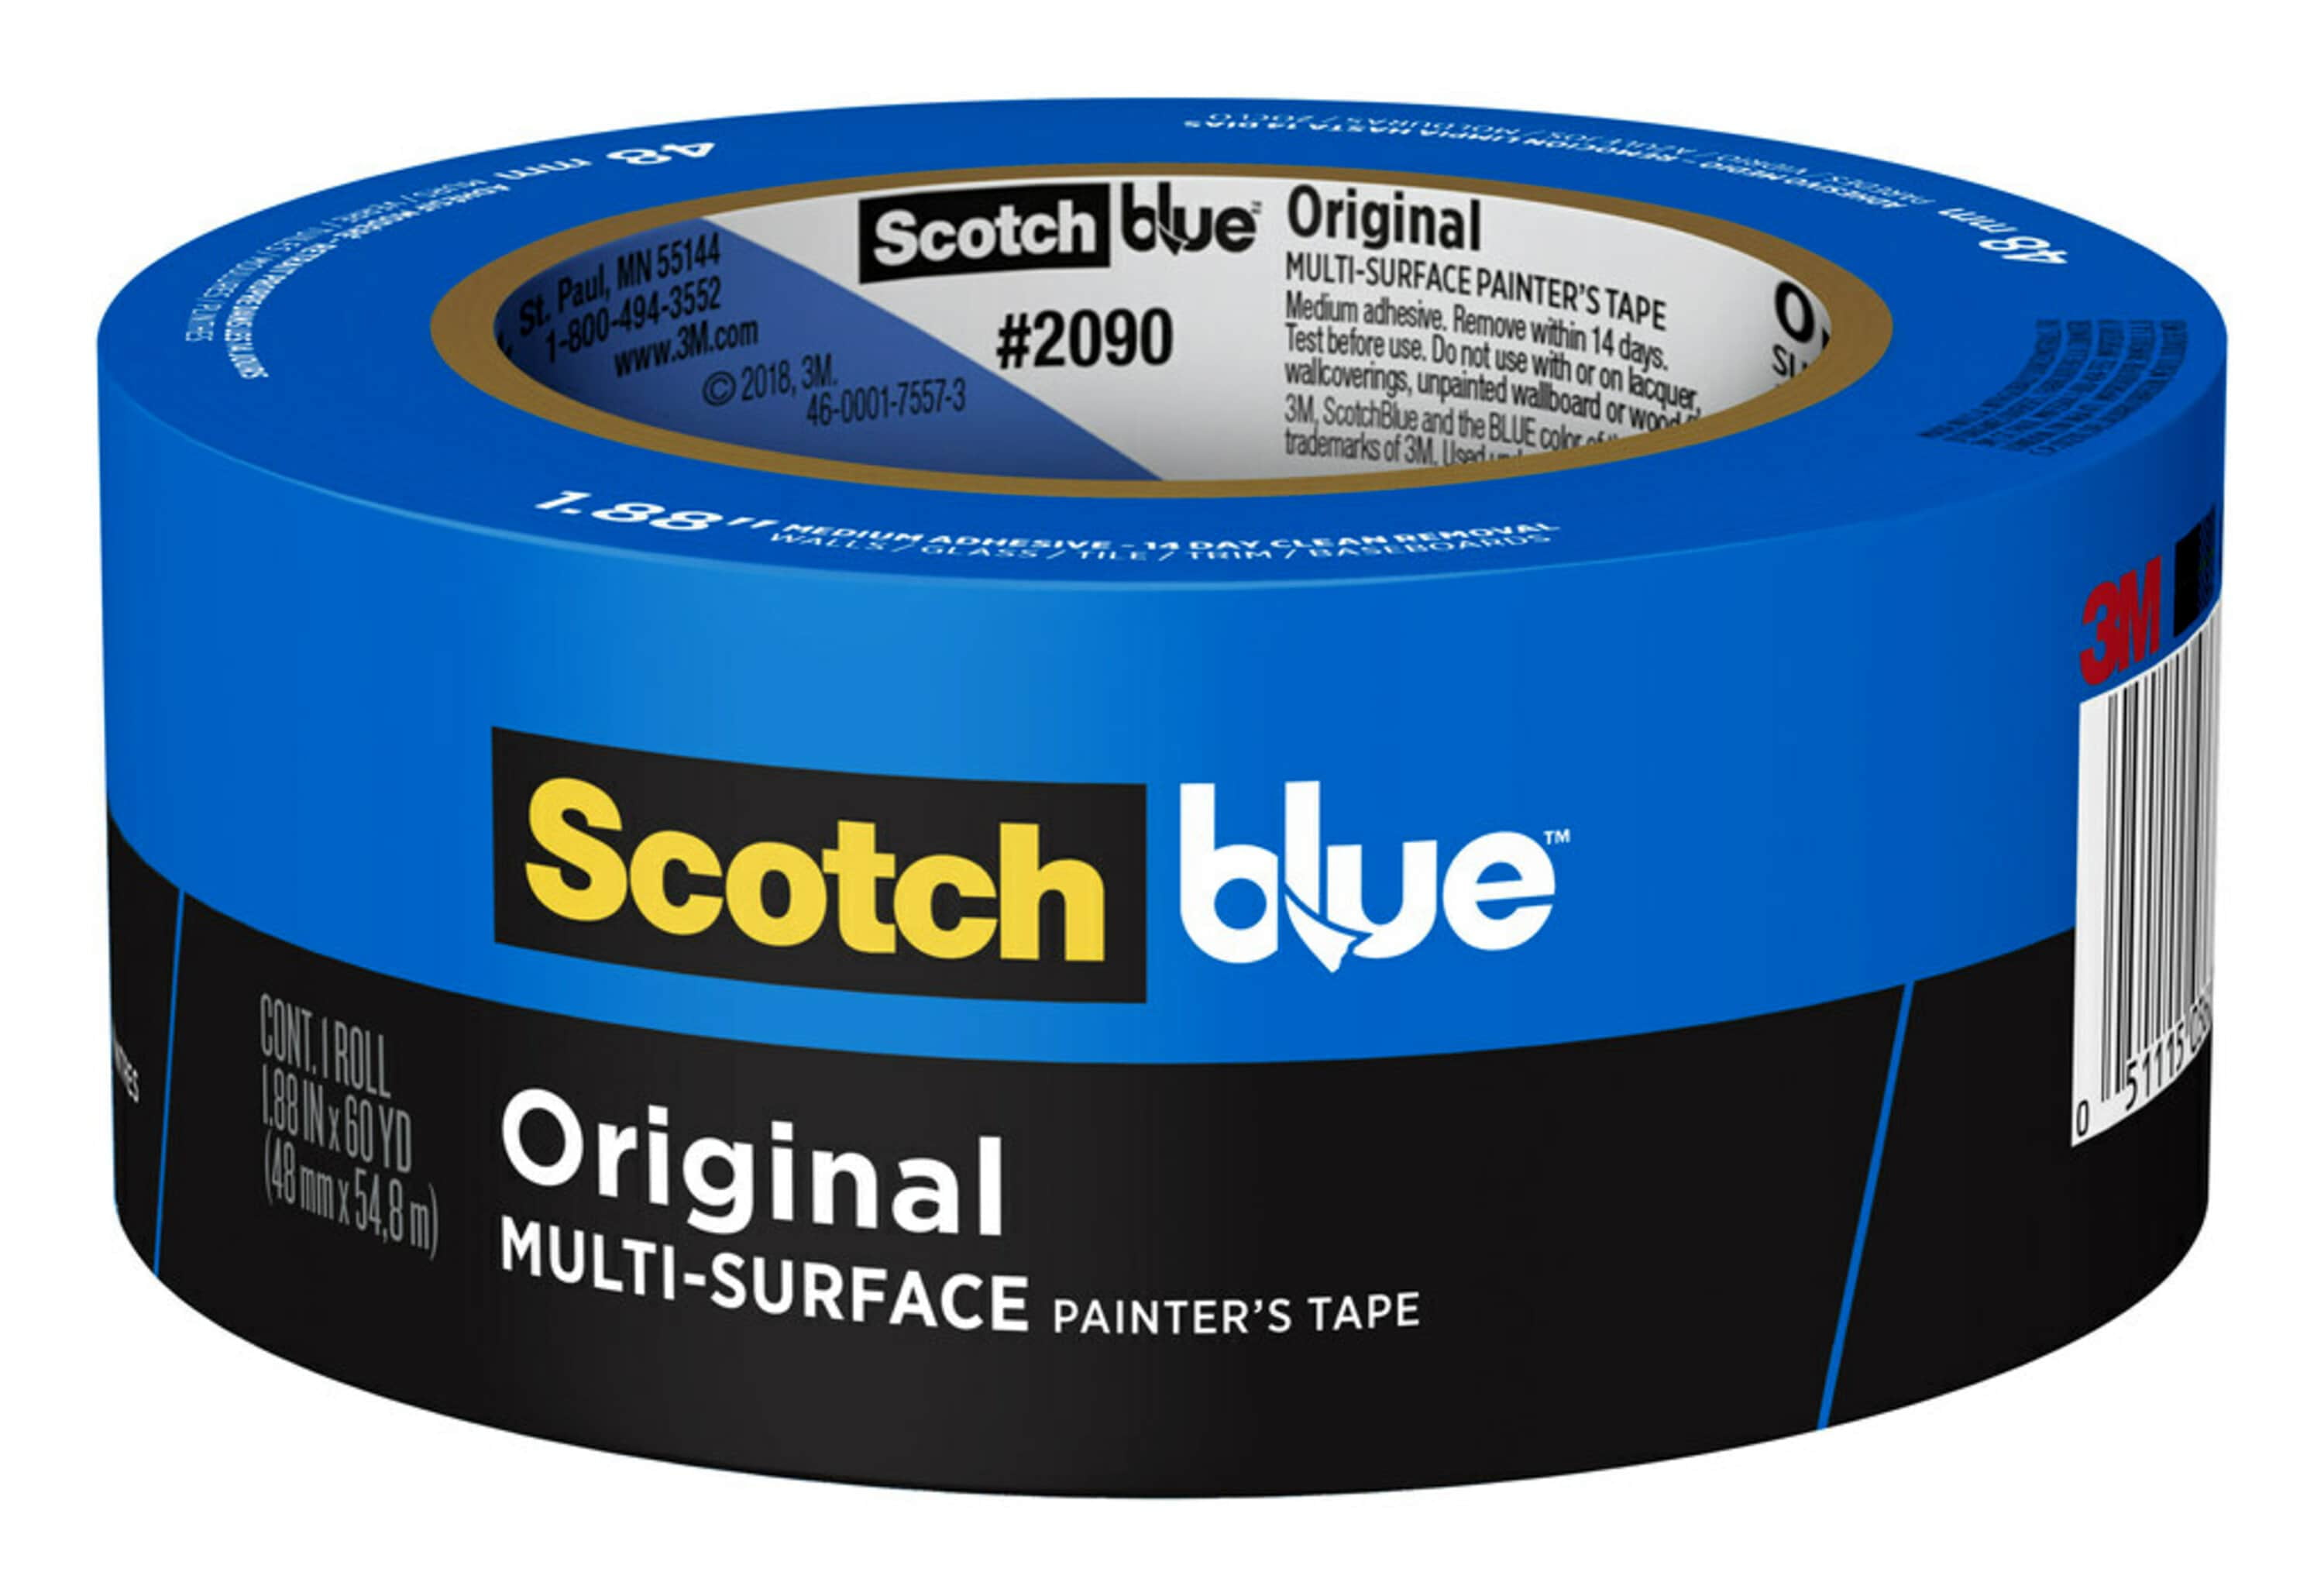 NEW INTERTAPE 2 X 60YD LARGE ROLL BLUE HEAVY DUCT TAPE 